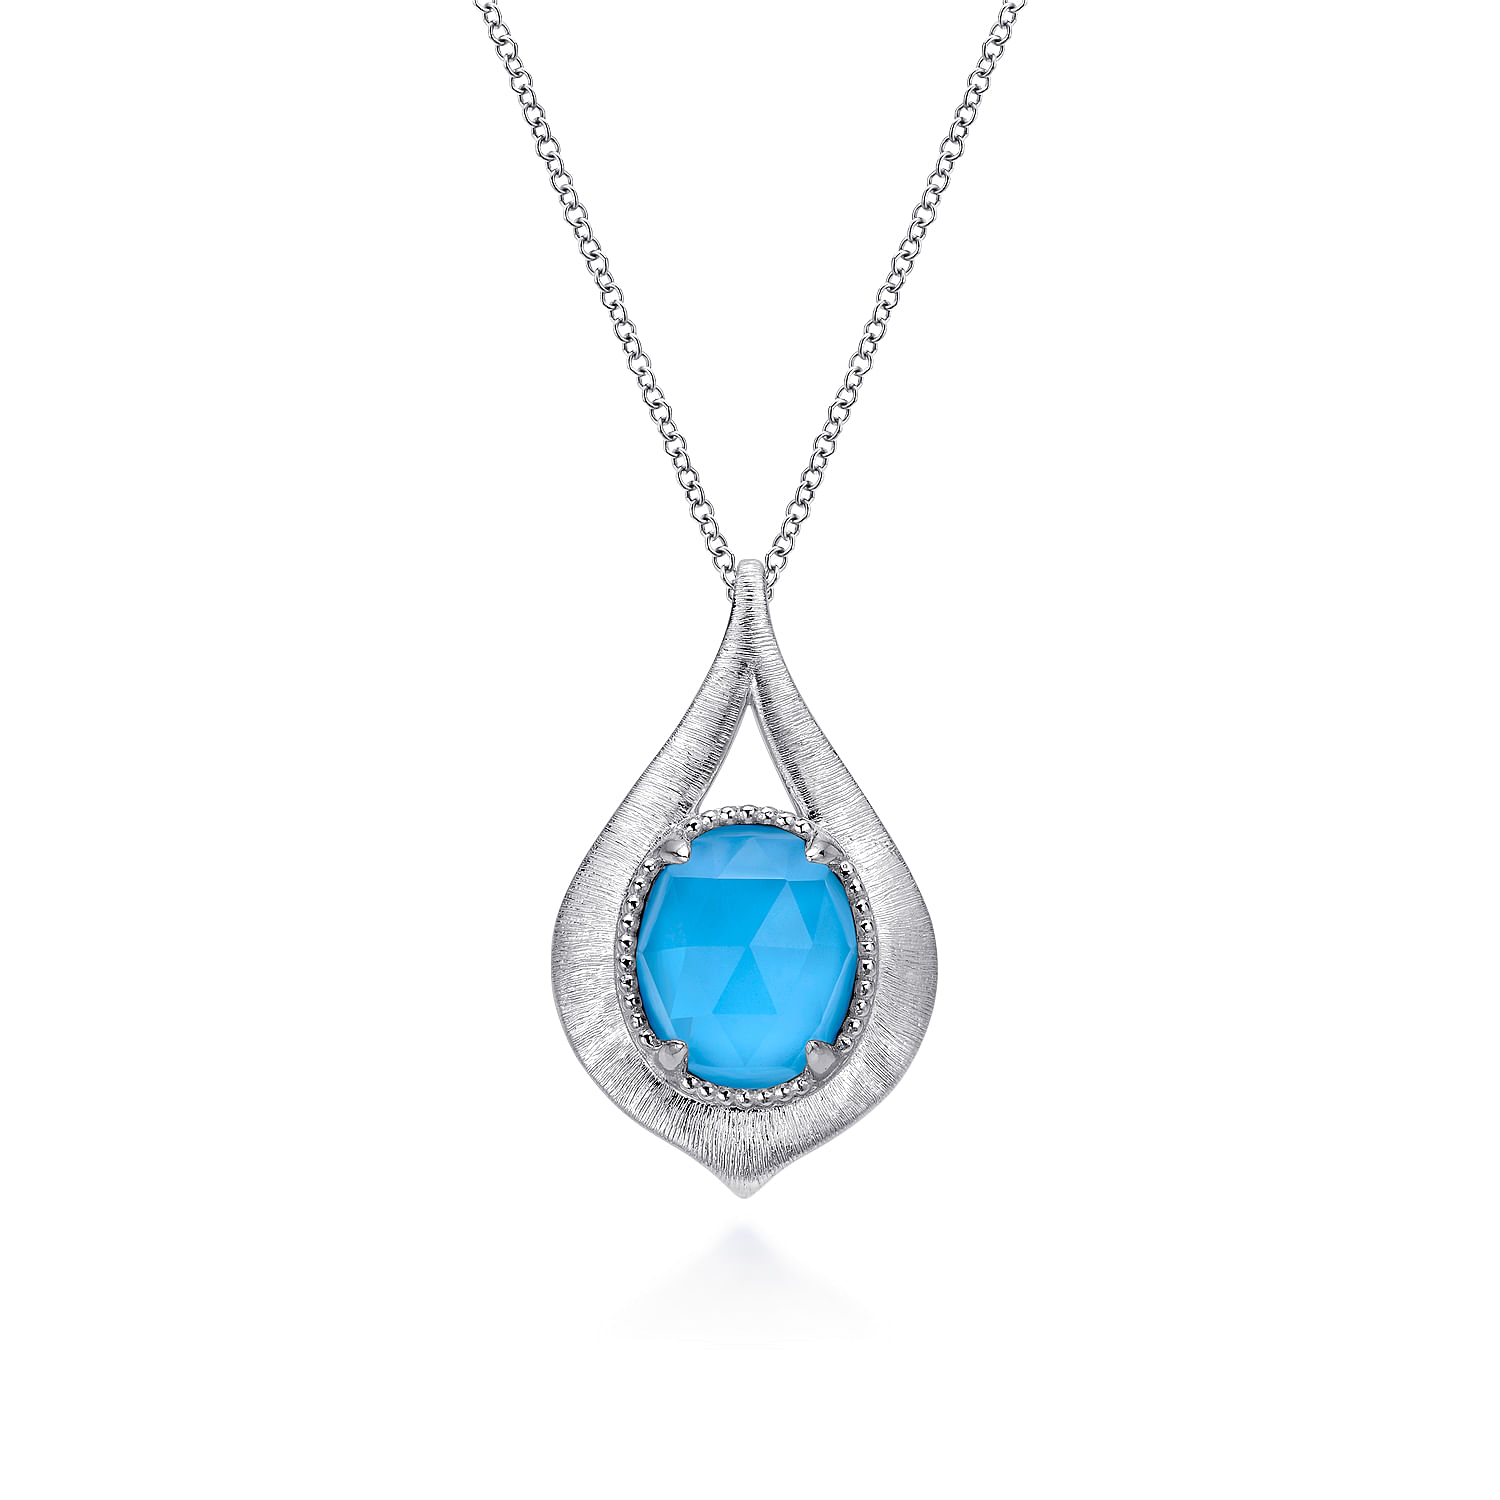 Gabriel - 925 Sterling Silver Oval Rock Crystal and Turquoise Pendant Necklace